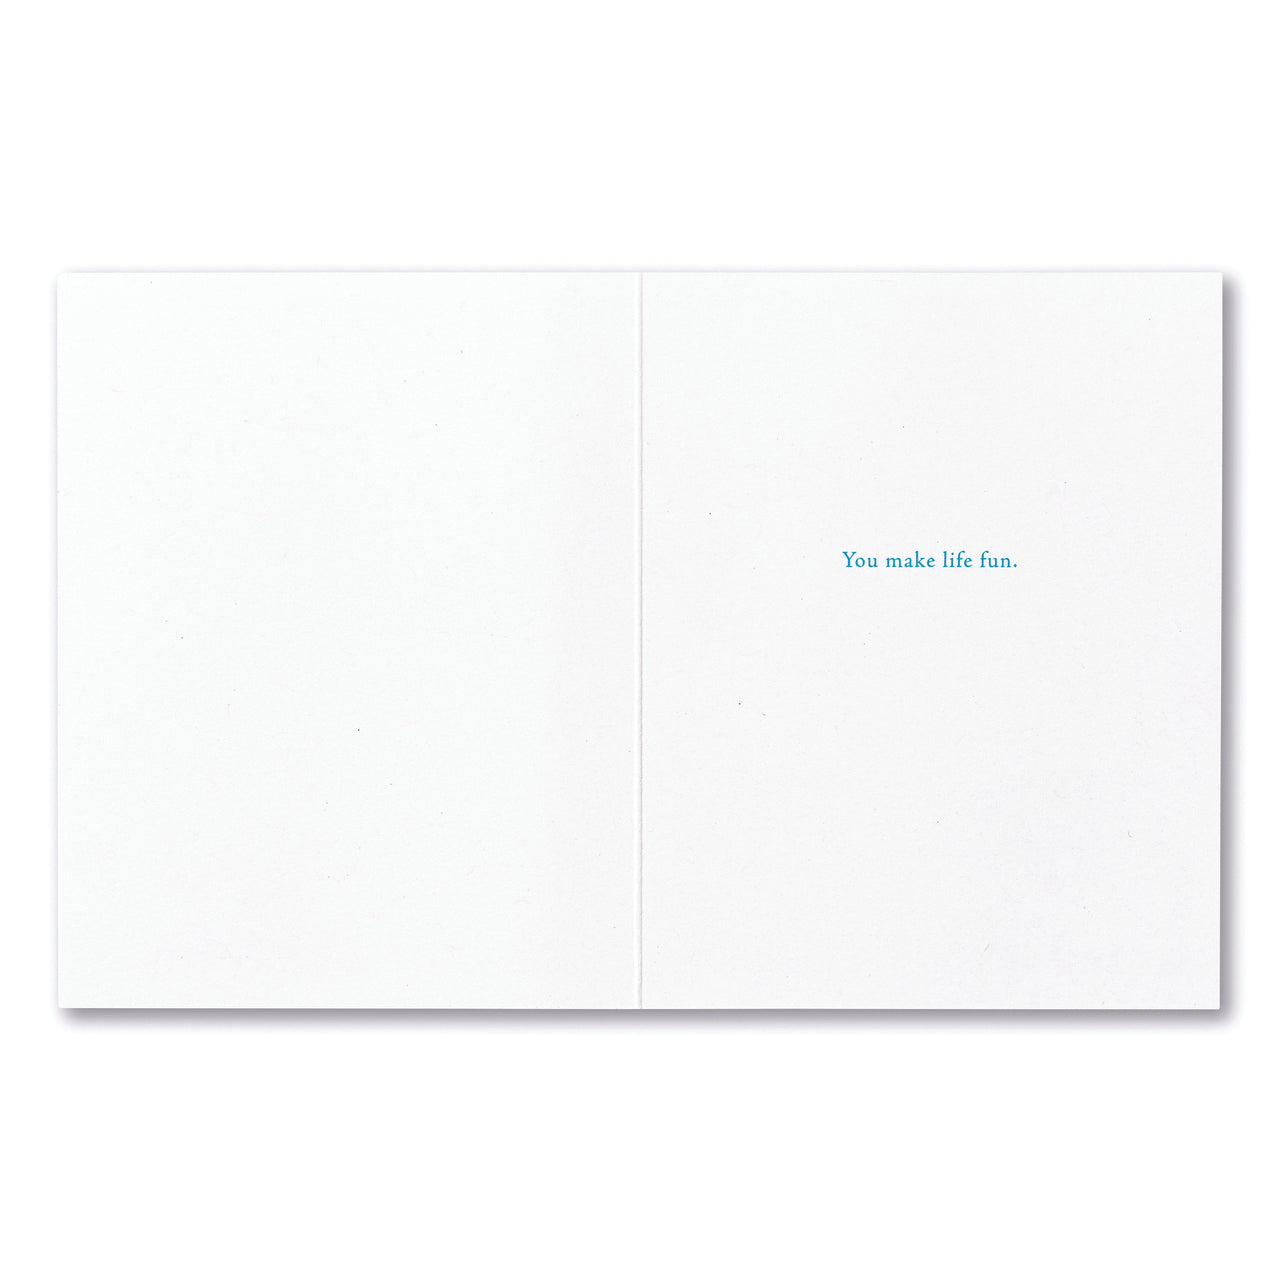 inside view of card is white with blue text listed in the description